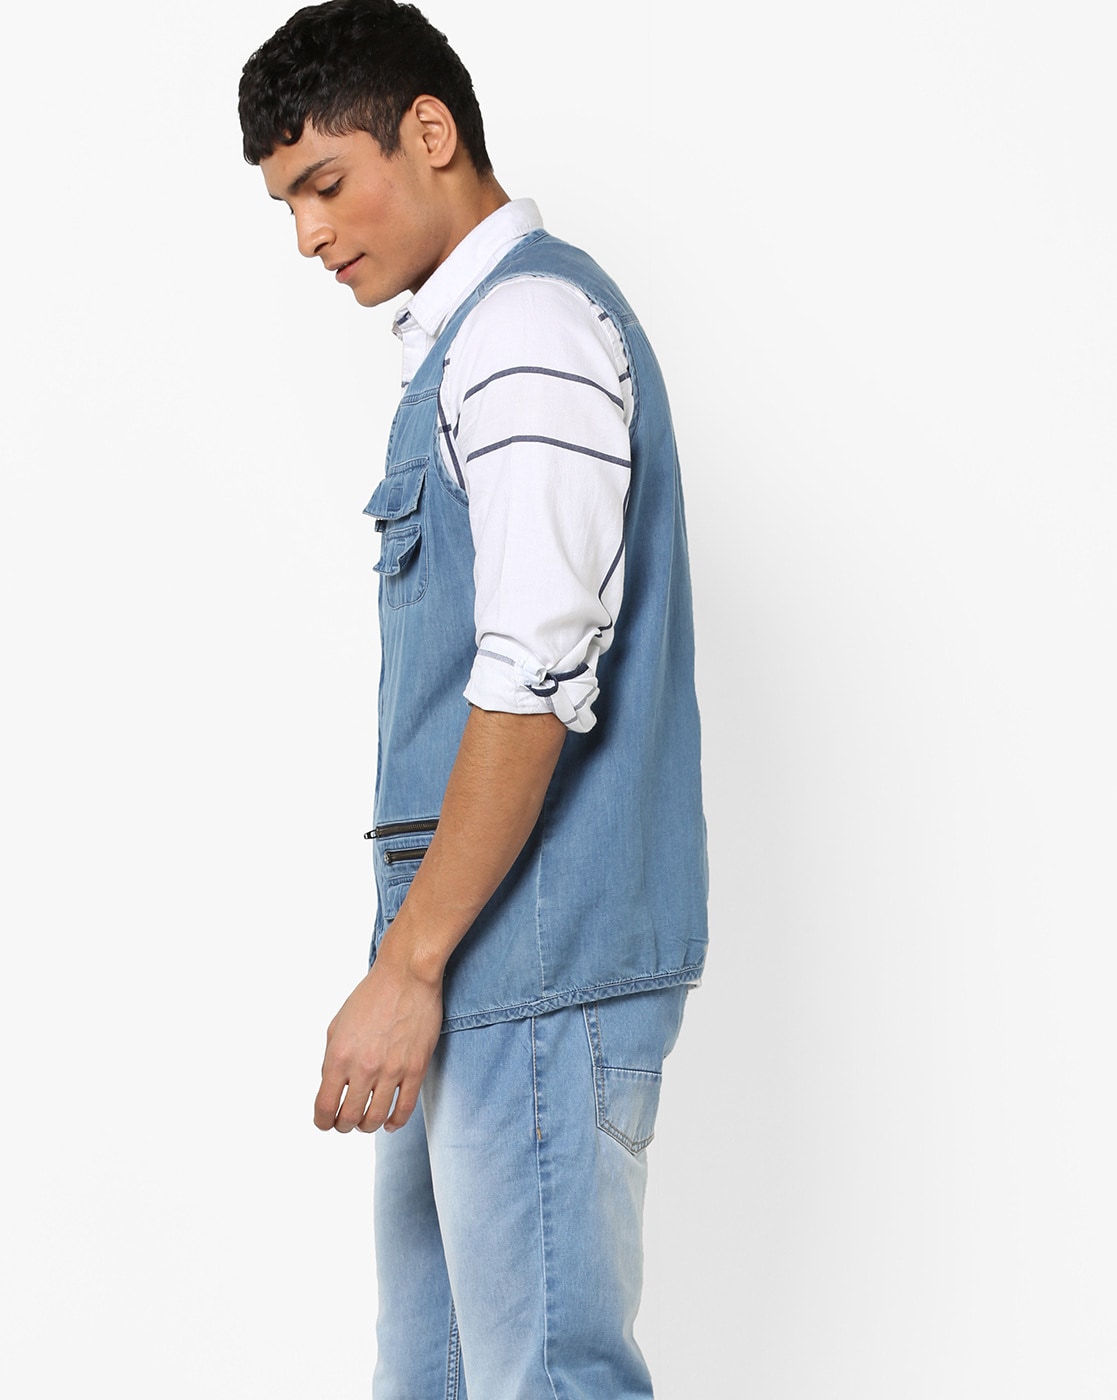 High Quality Mens Biker Denim Jacket Sleeveless Casual Fashion Mens  Waistcoat With Jeans In Multiple Sizes M XXXL From Tomwei, $27.42 |  DHgate.Com